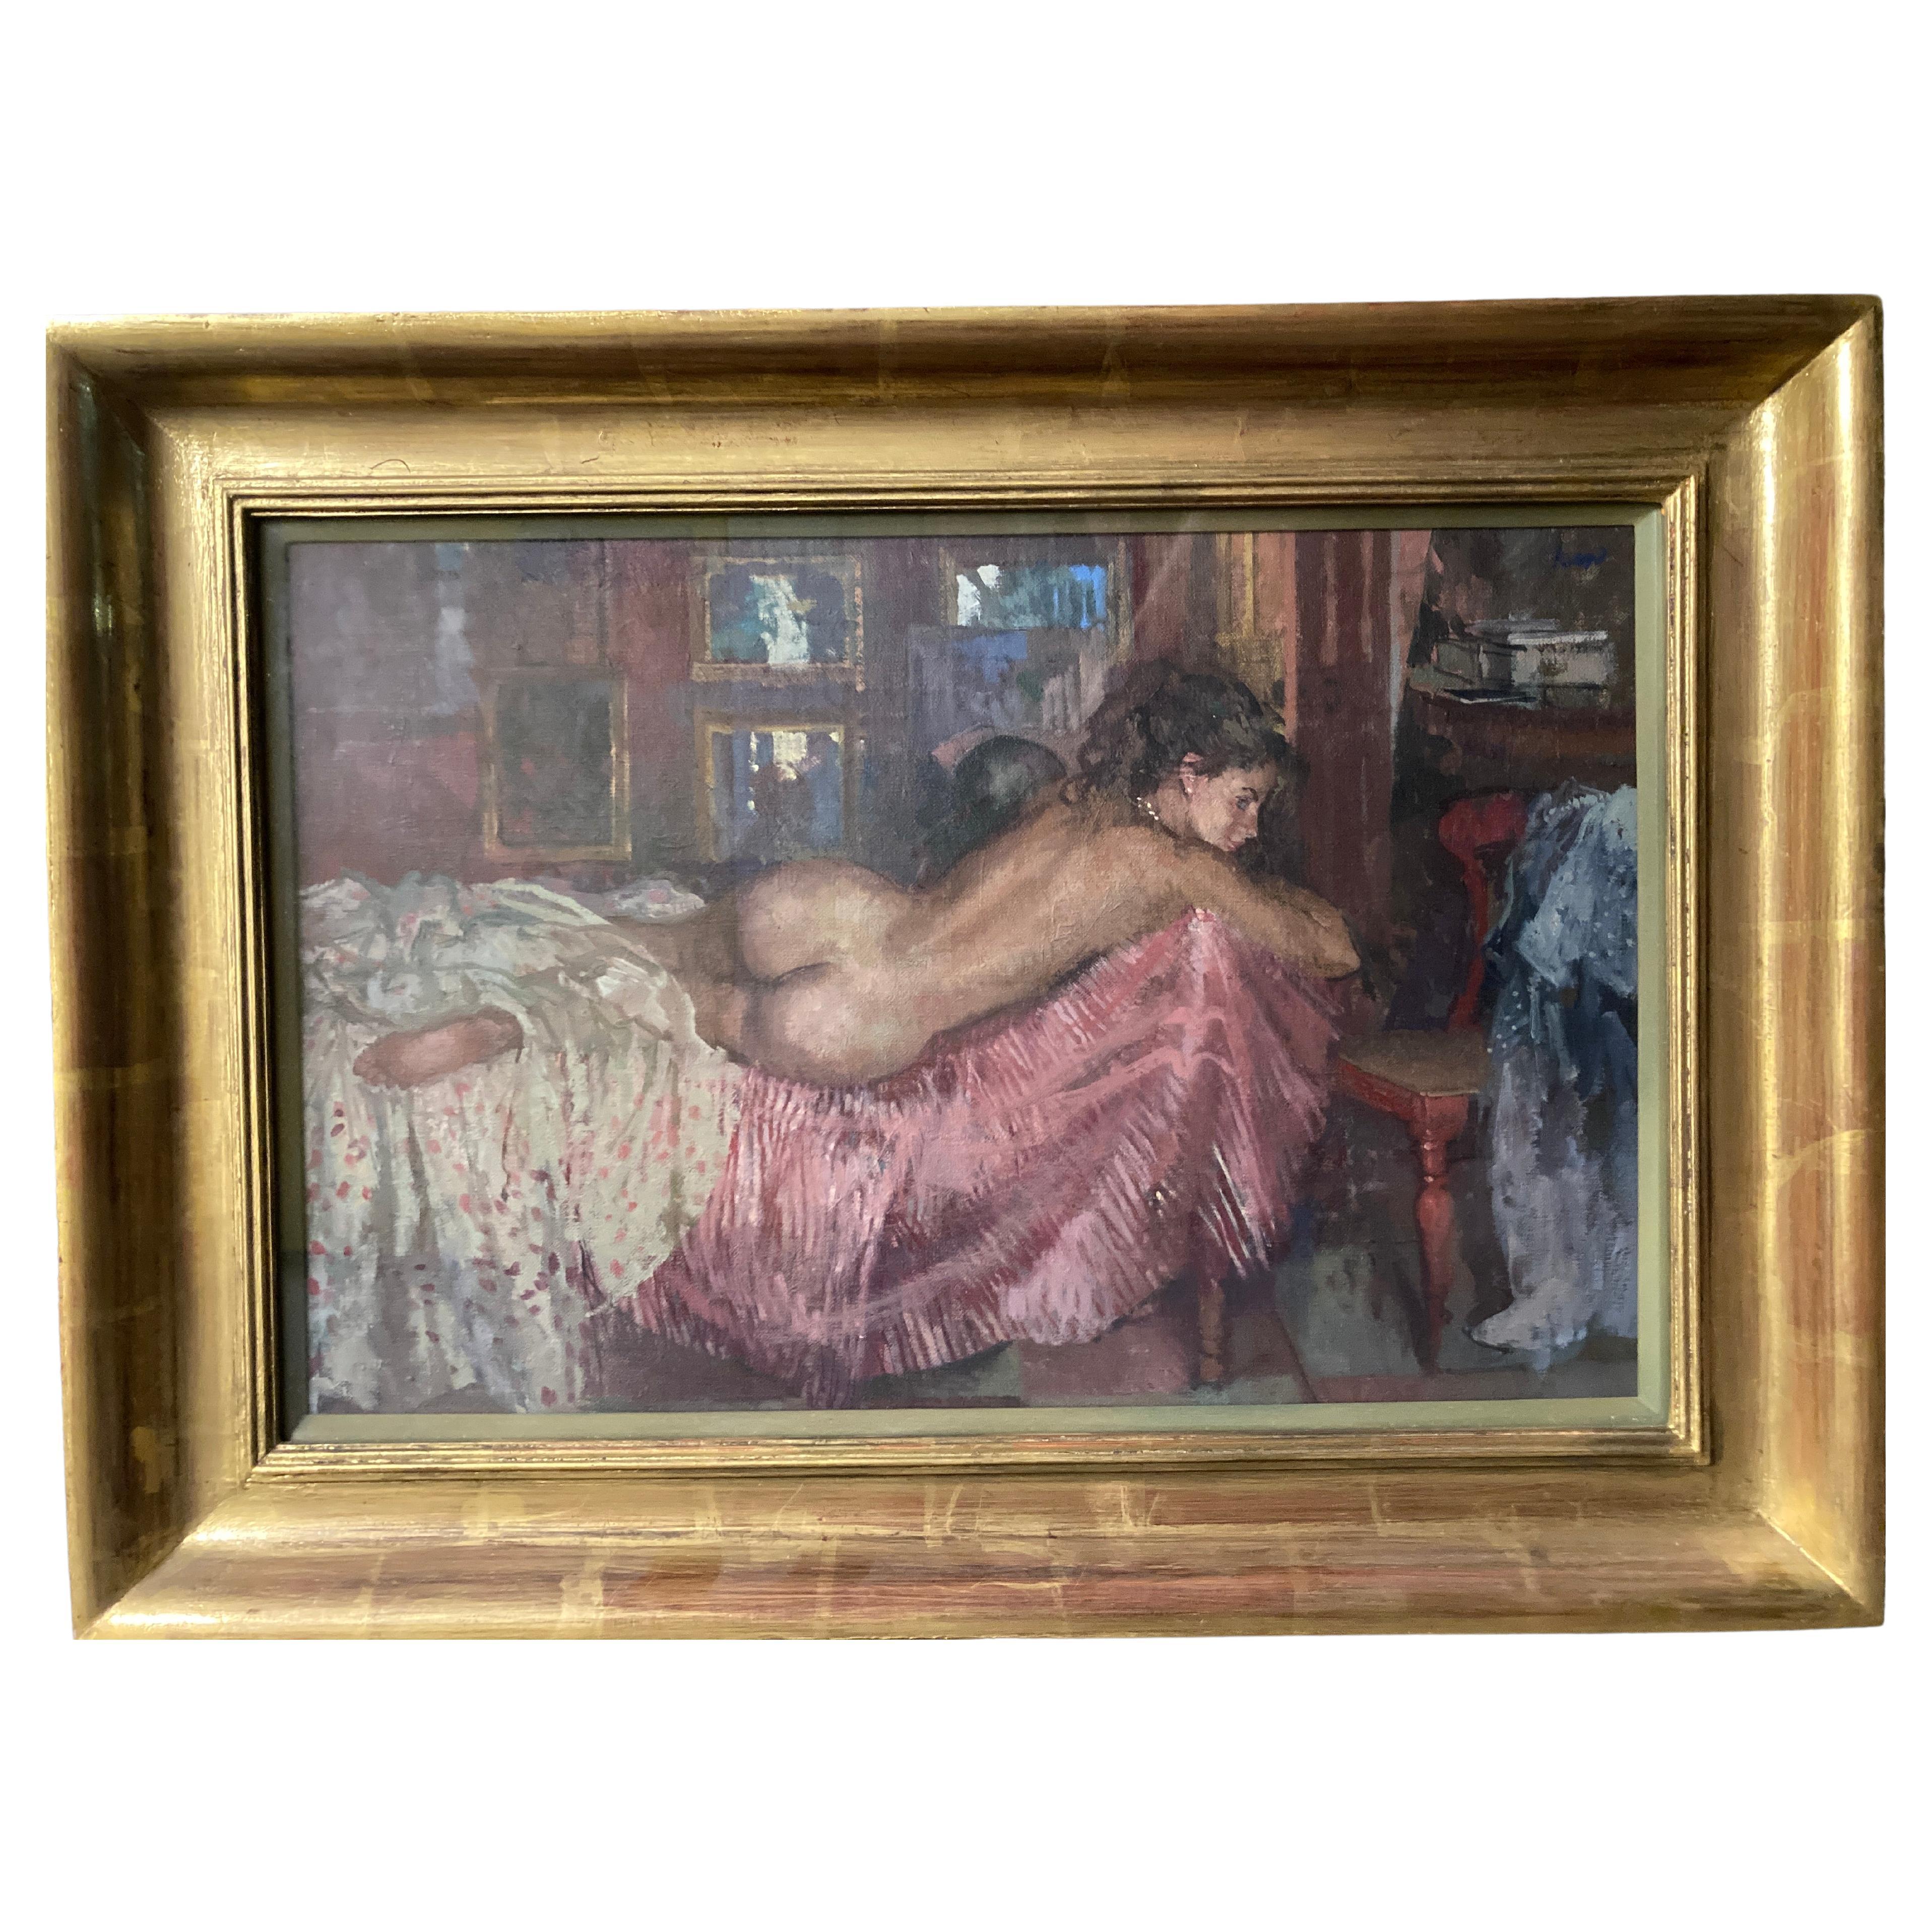 RECLINING NUDE by Peter Kuhfeld (b 1952) For Sale